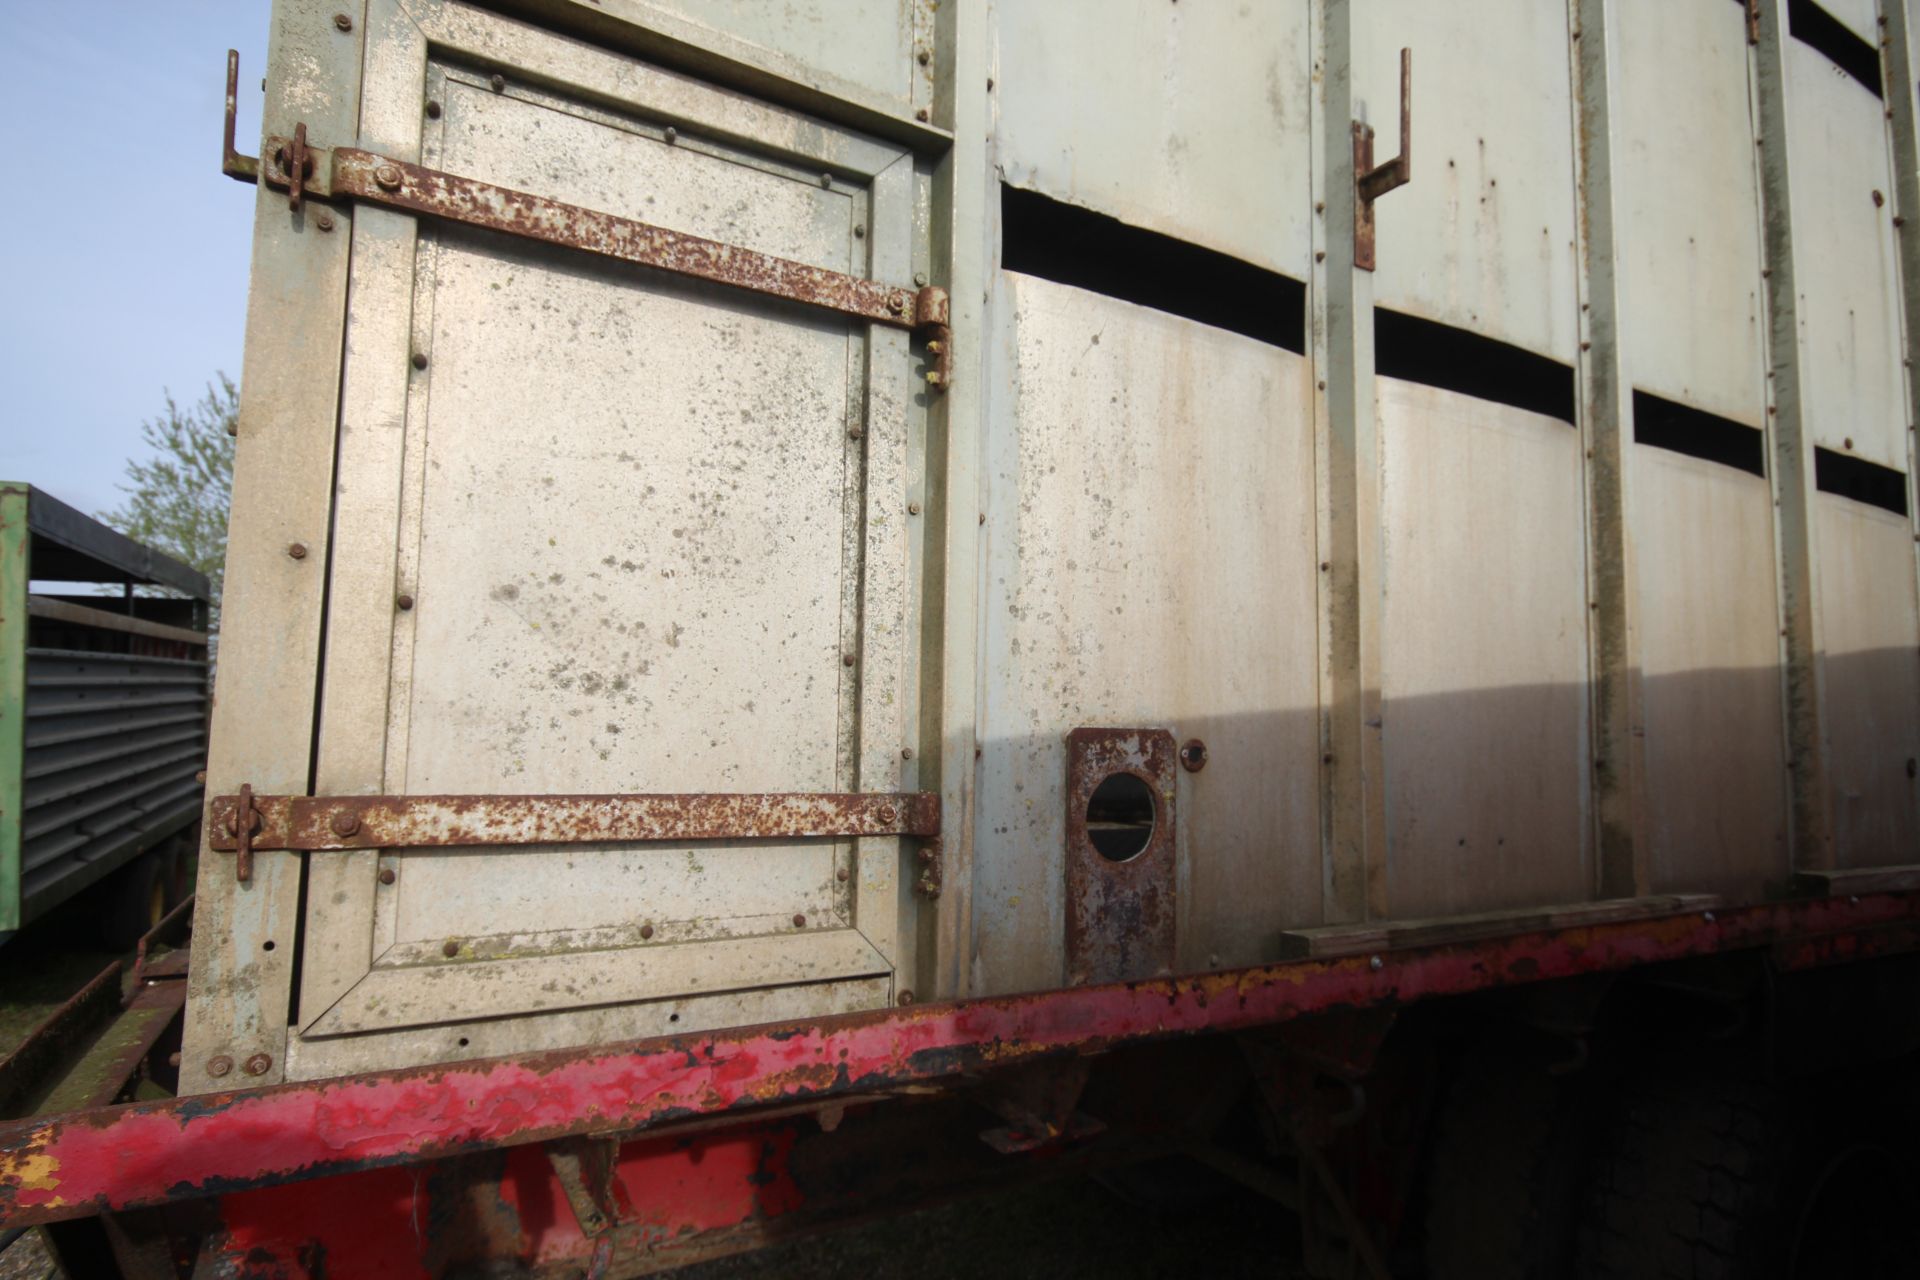 19ft 6in twin axle tractor drawn livestock trailer. Ex-lorry drag. With steel suspension and twin - Image 12 of 34